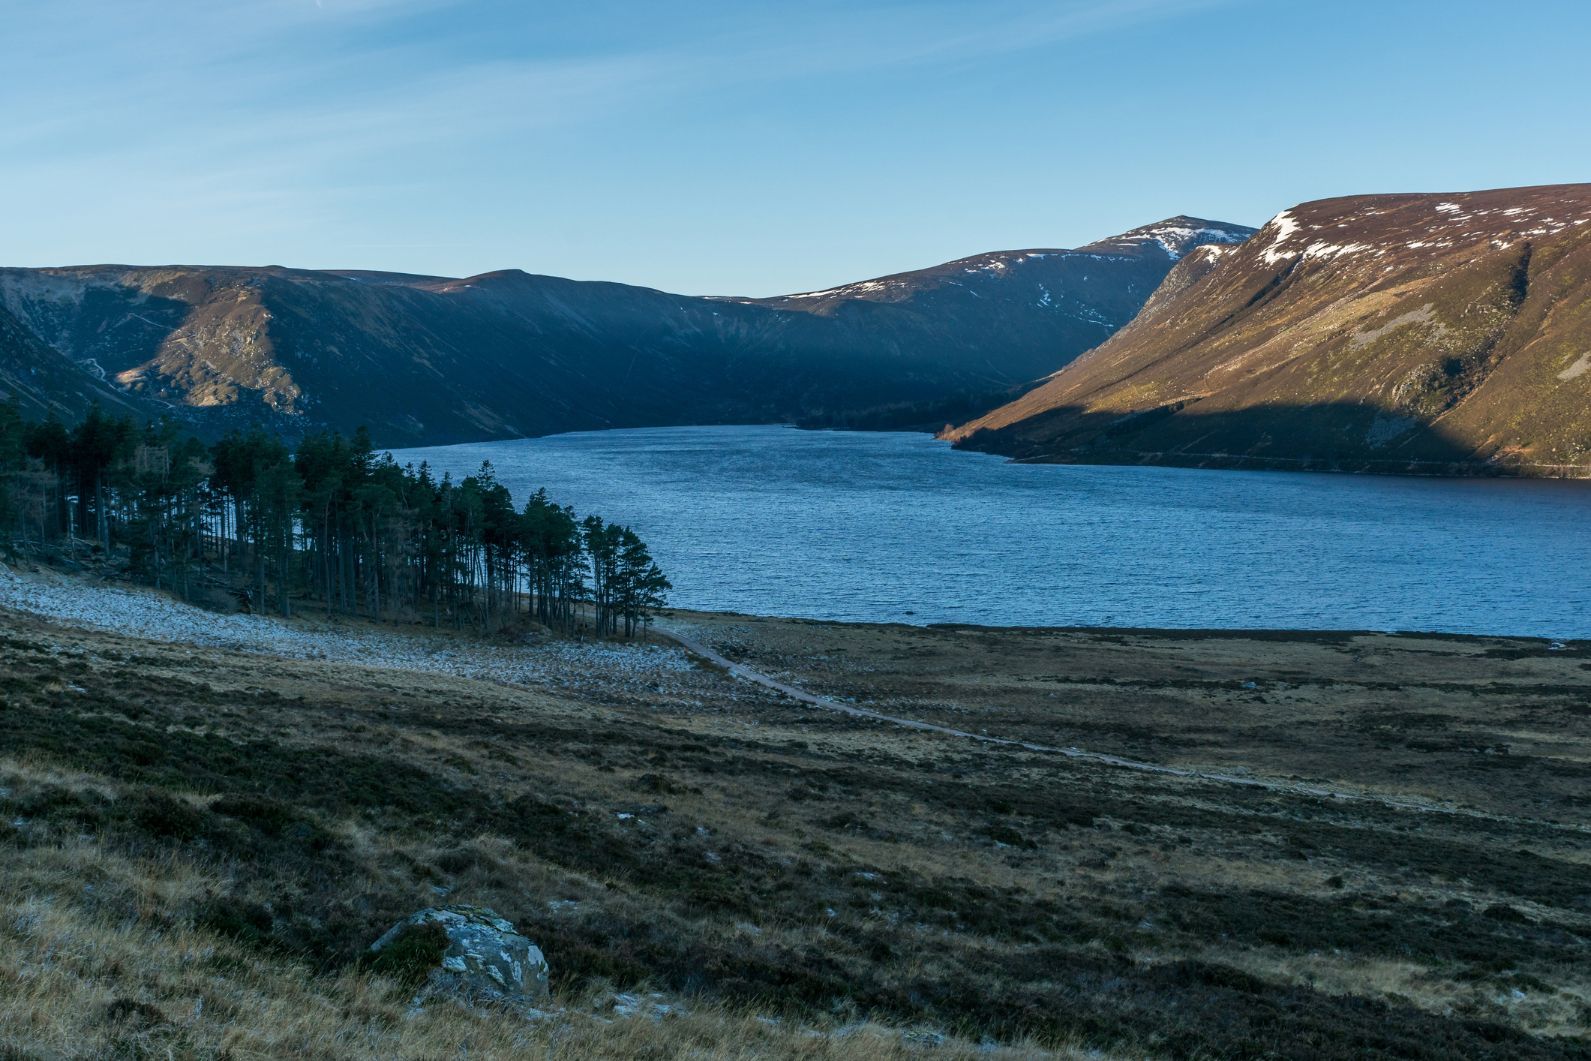 Looking down onto Loch Muick with the Broad Cairn in the background, in the Cairngorms.